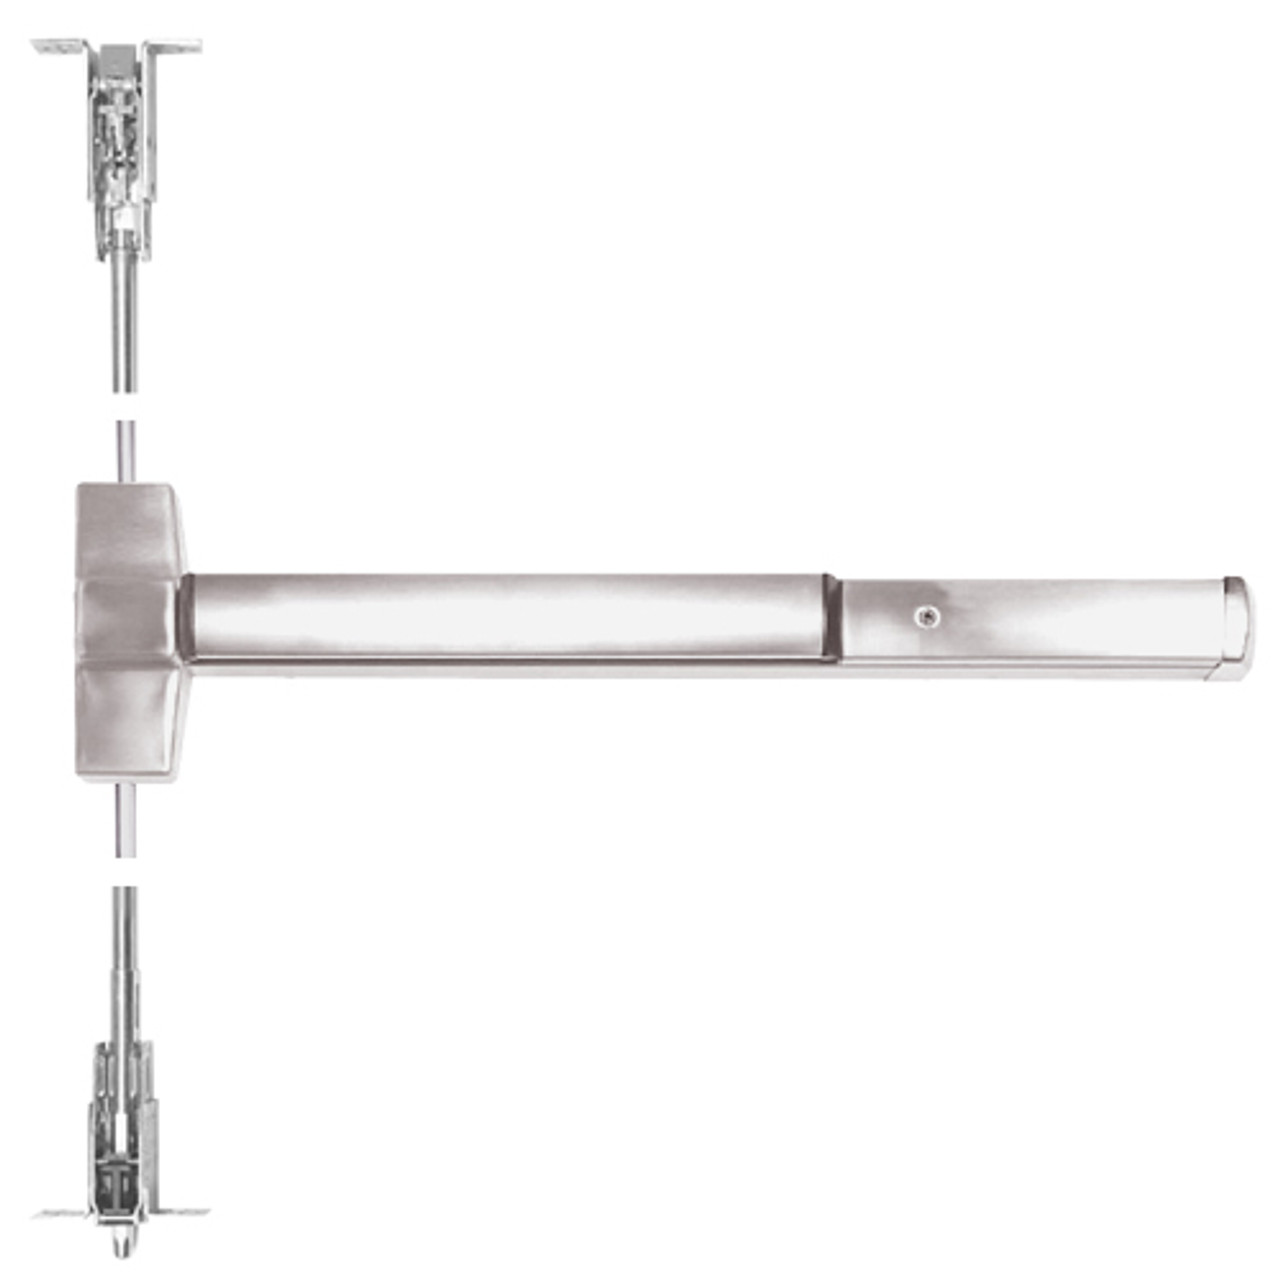 ED5860-630-MELR-M92 Corbin ED5800 Series Non Fire Rated Concealed Vertical Rod Device with Motor Latch Retraction and Touchbar Monitoring in Satin Stainless Steel Finish